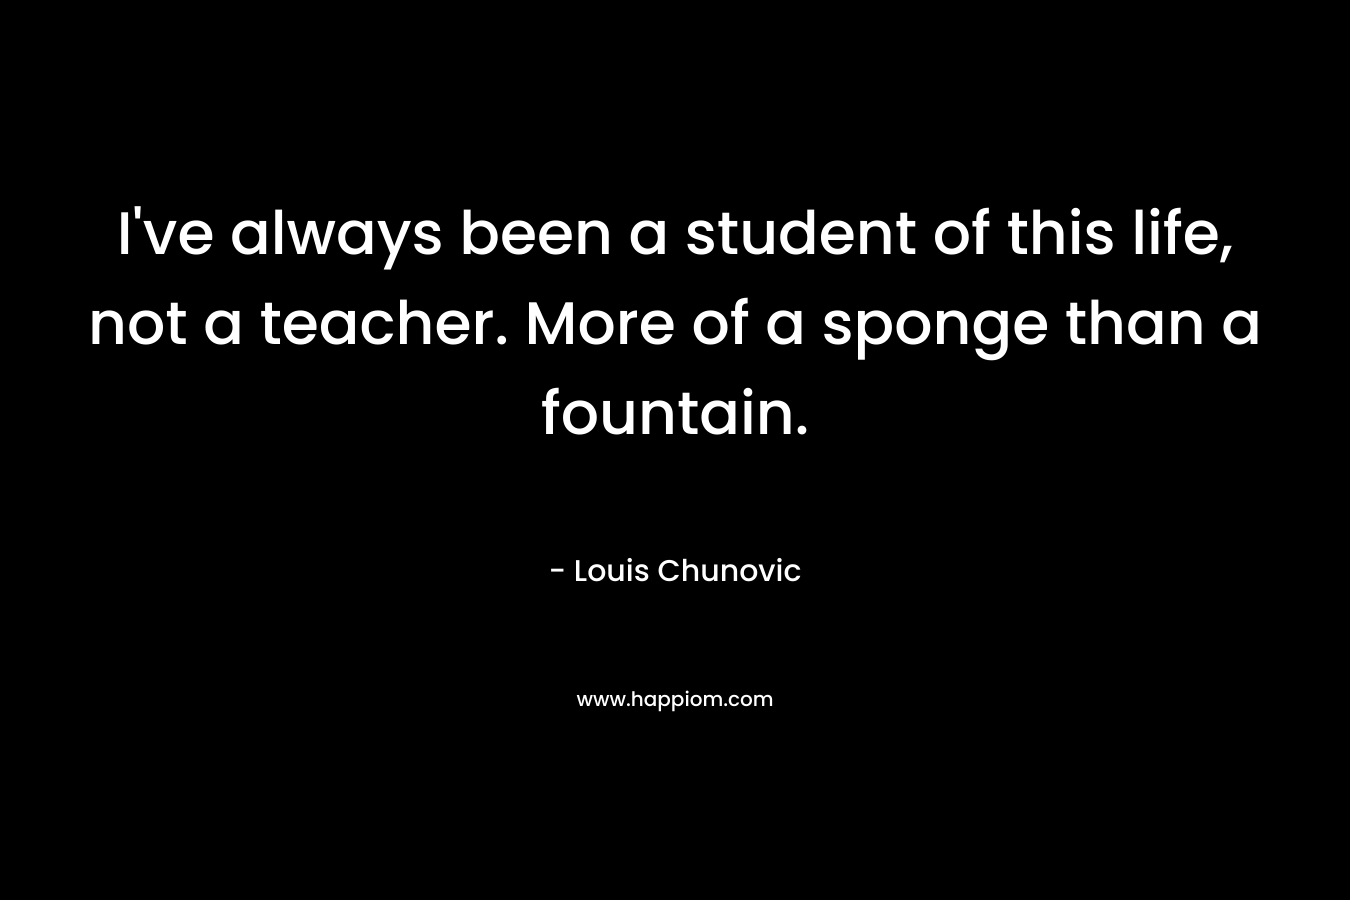 I've always been a student of this life, not a teacher. More of a sponge than a fountain.